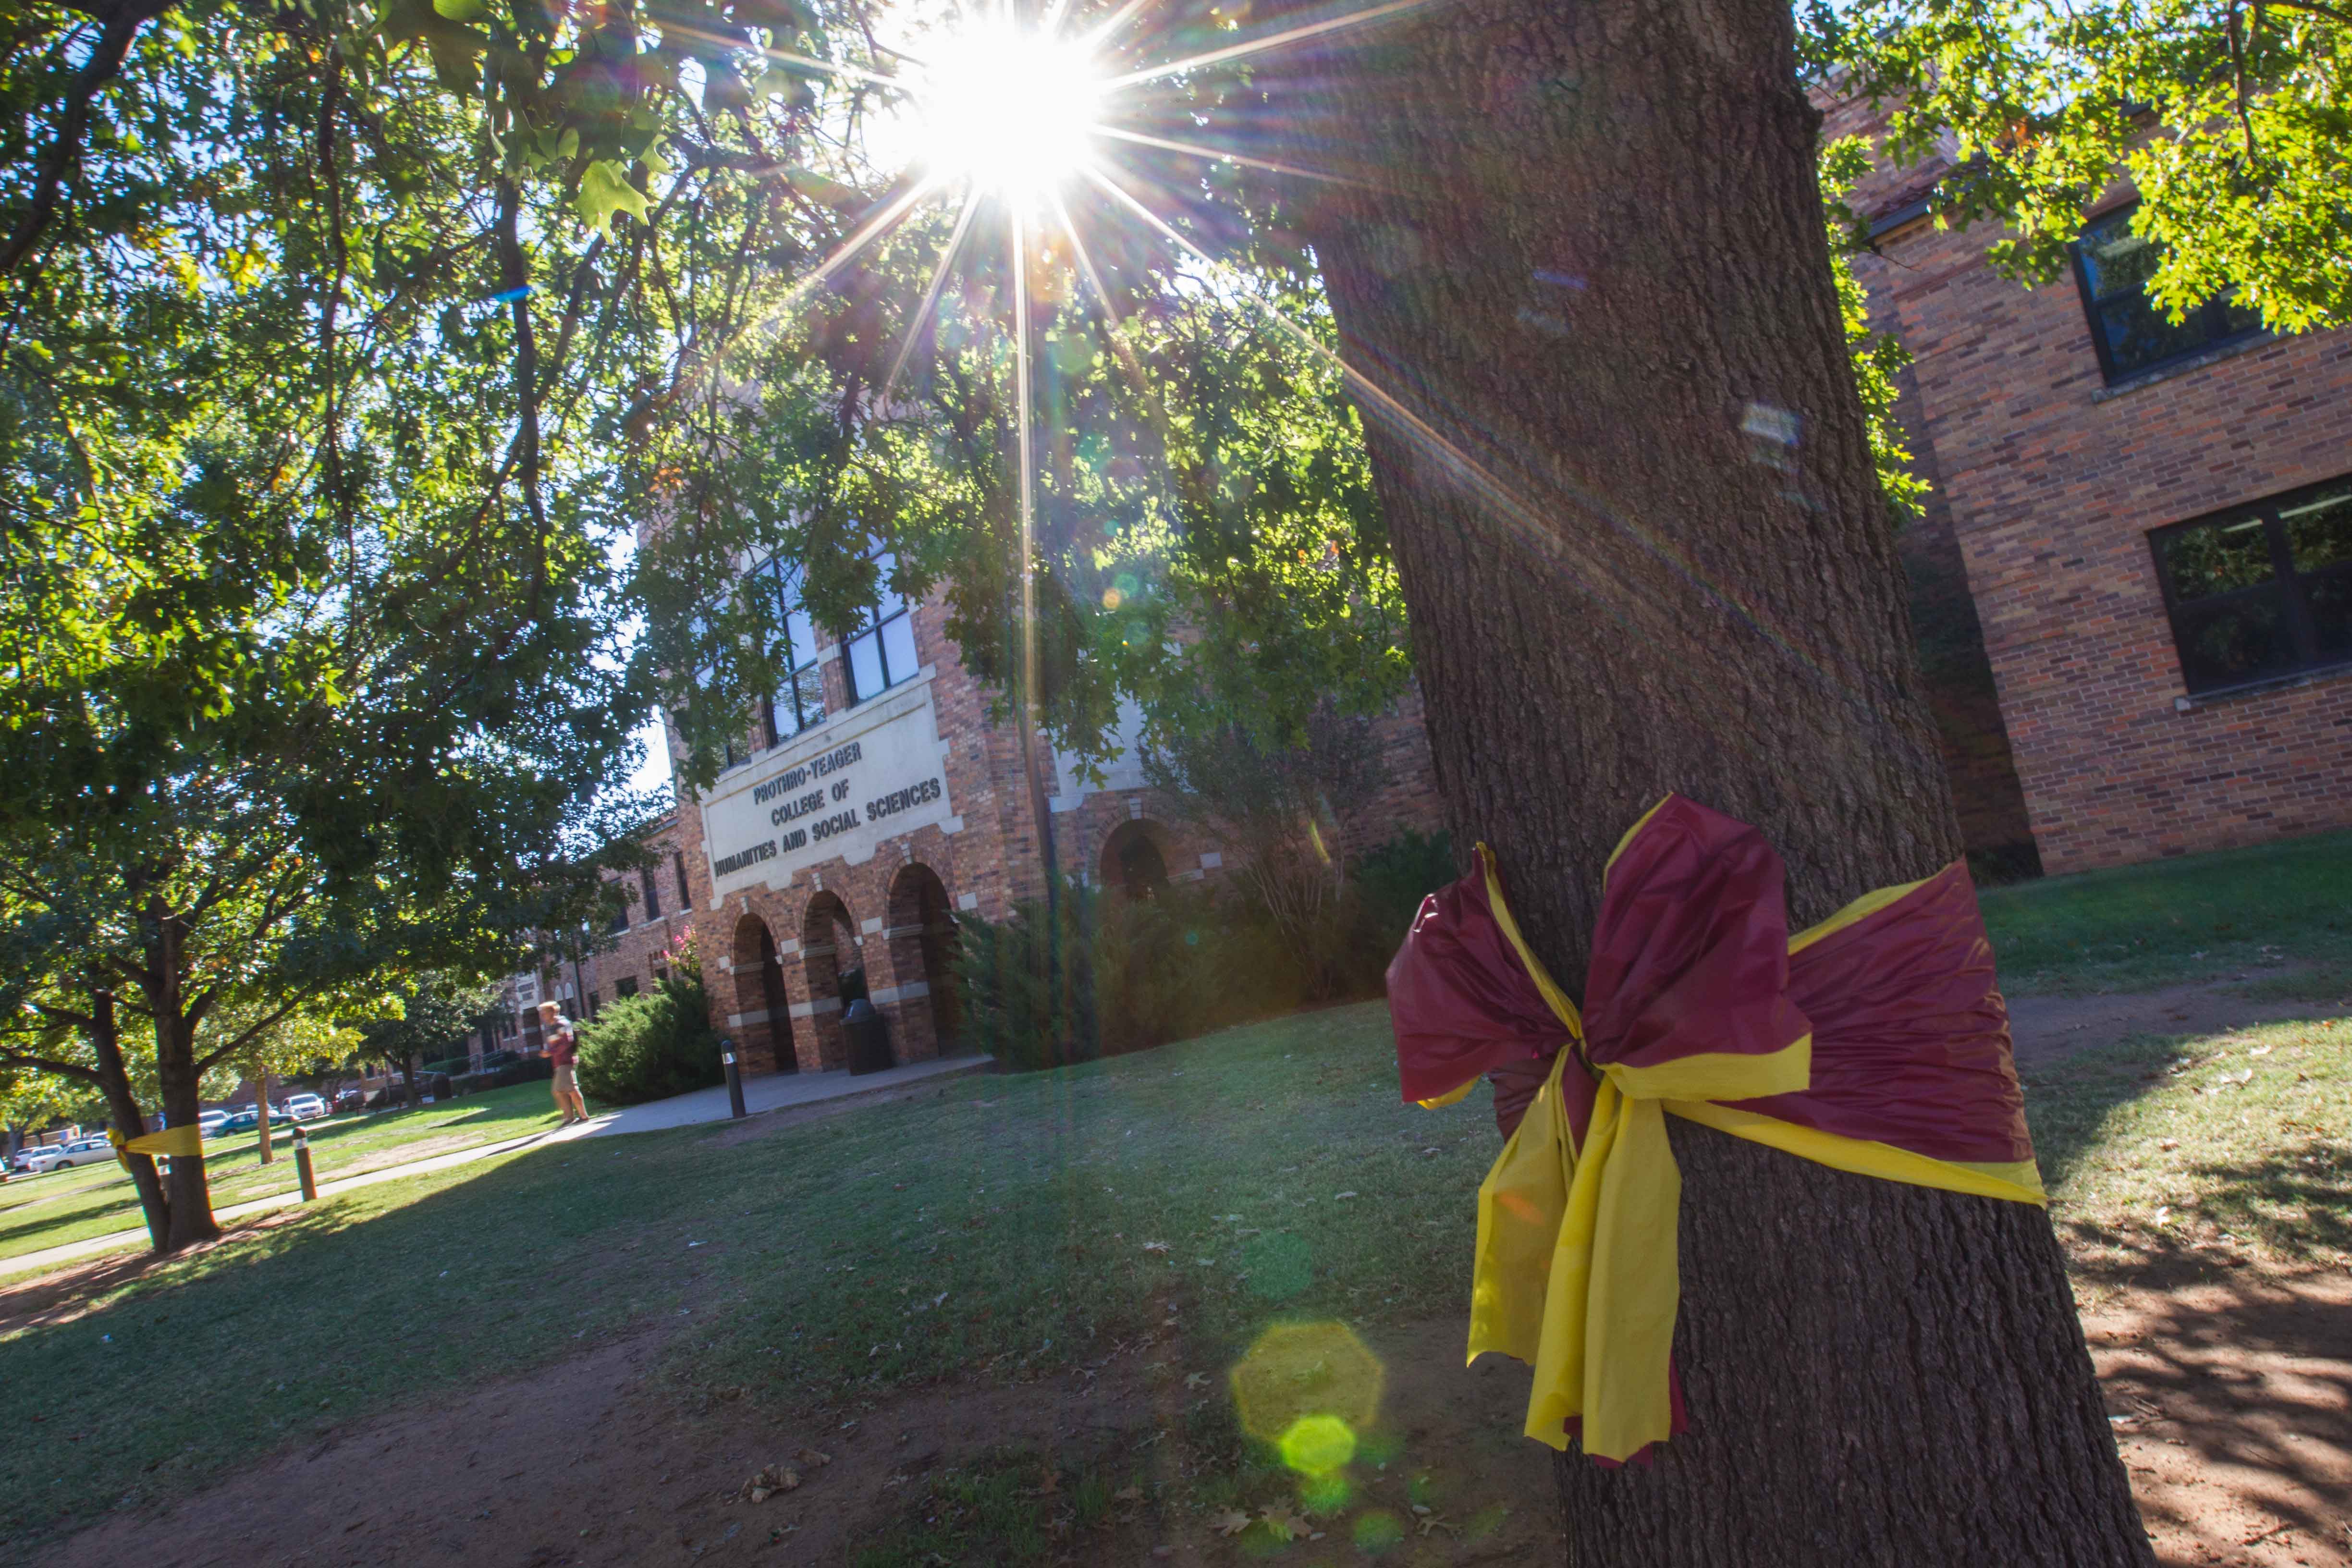 Large tree in the foreground with a large maroon and gold bow on it.  In the background there is a student walking out of the Prothro-Yeager College of Humanities and Social Sciences.